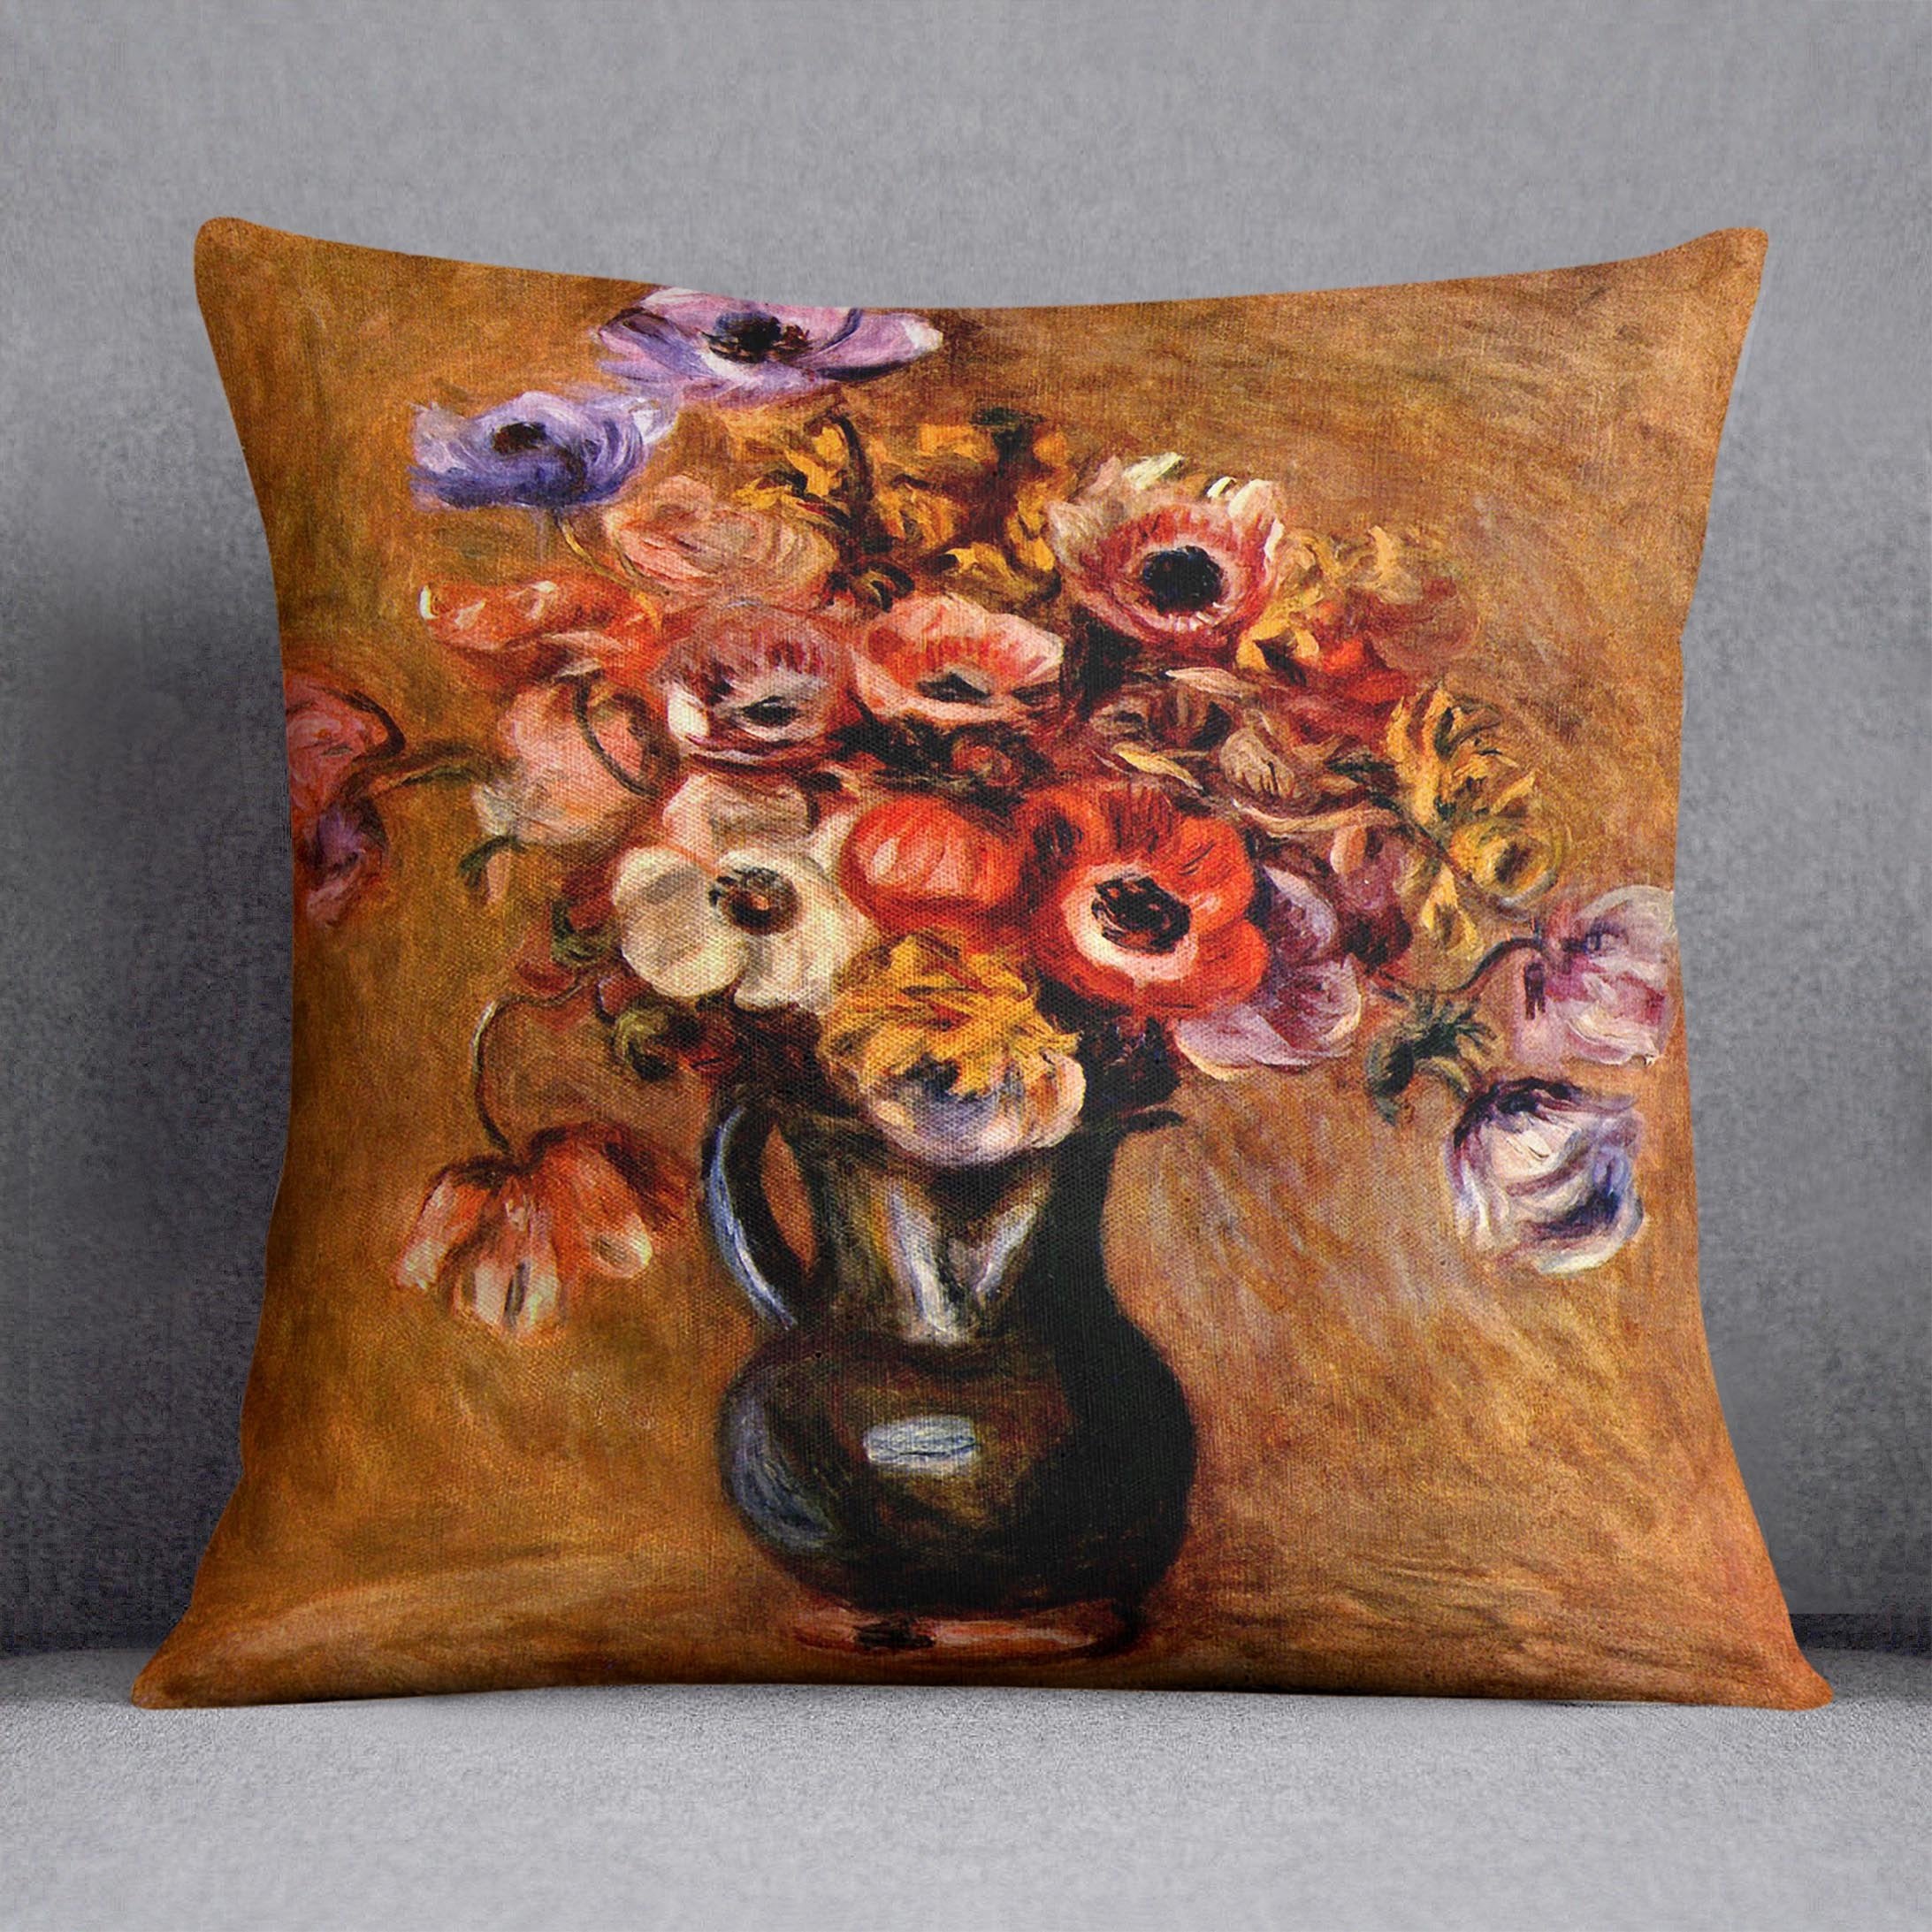 Still life with anemones by Renoir Throw Pillow